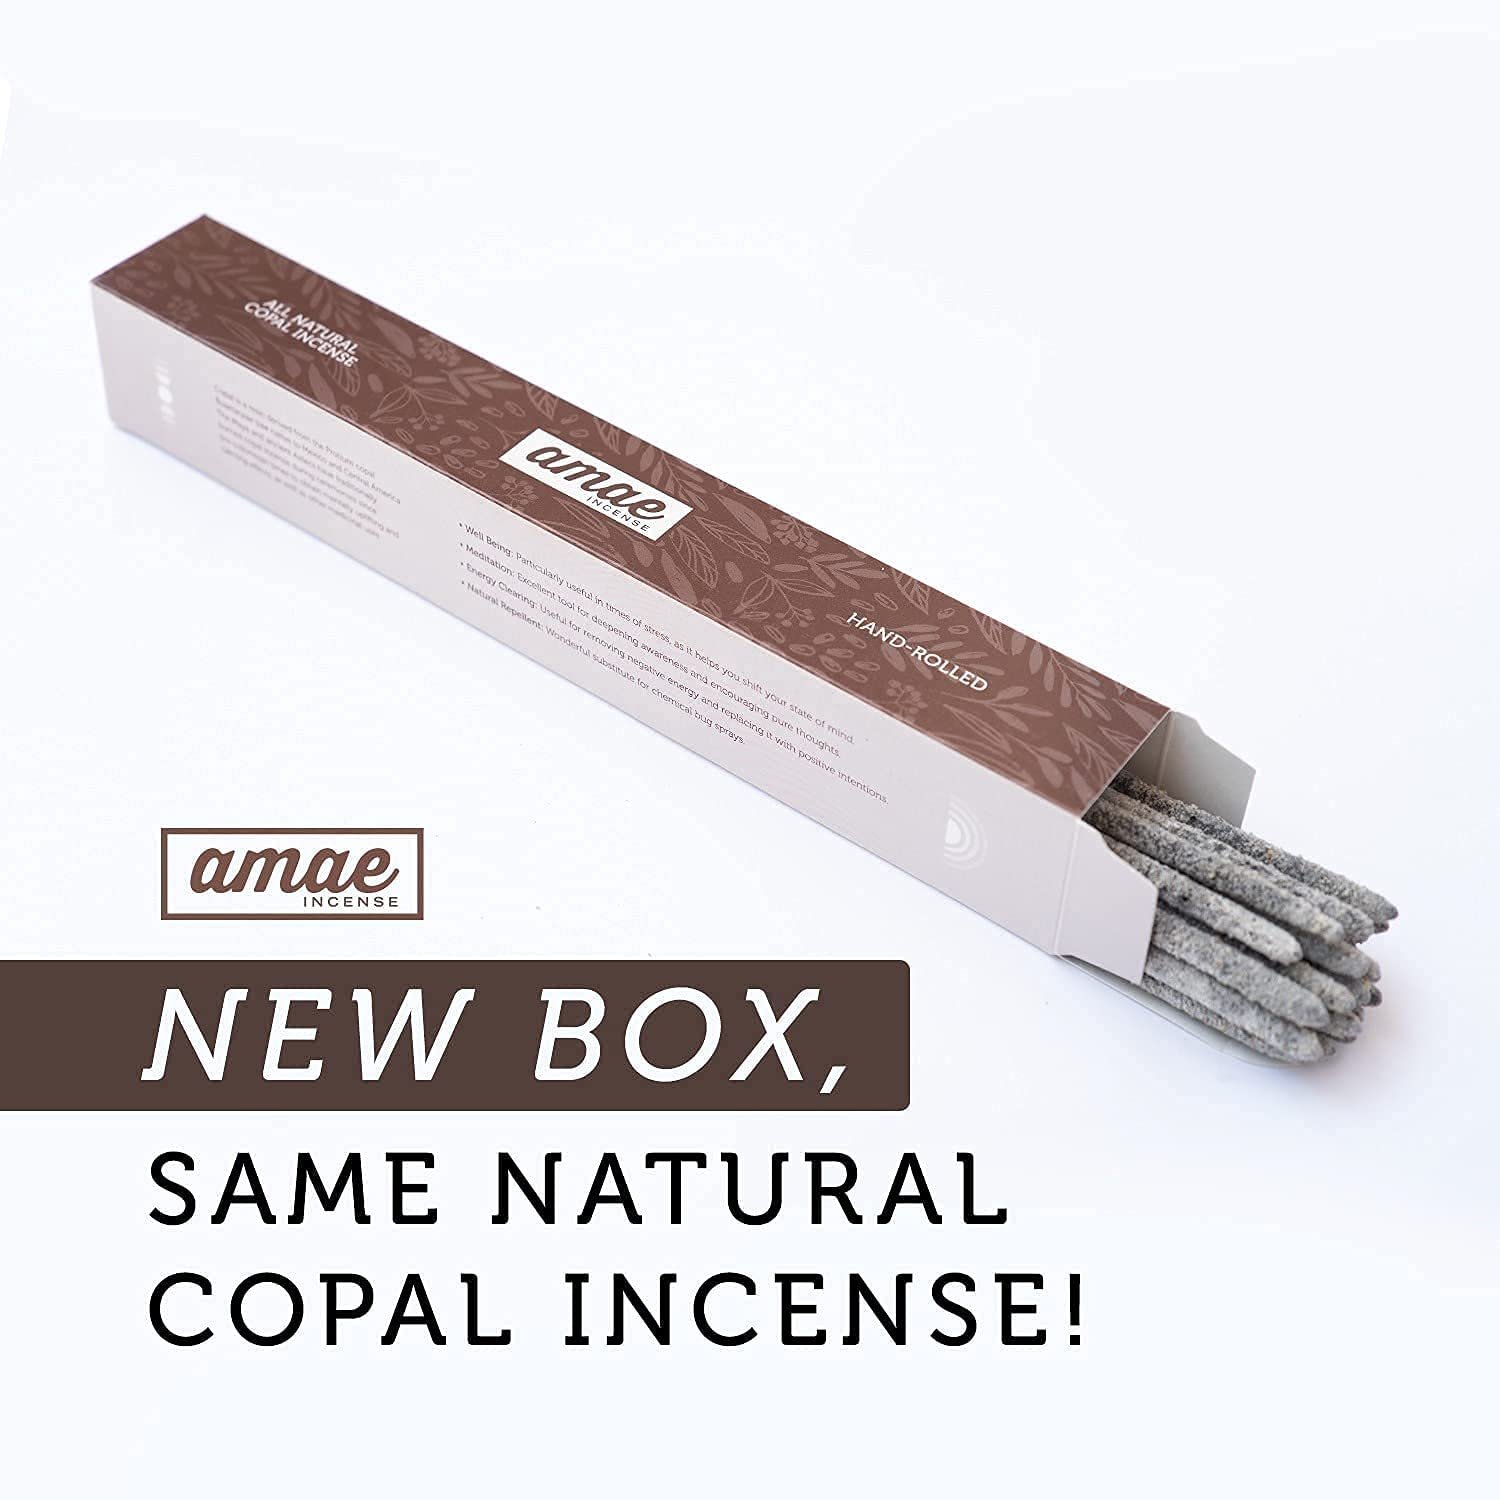 Copal Incense 40 Sticks: Helps with anxiety & depression, meditation